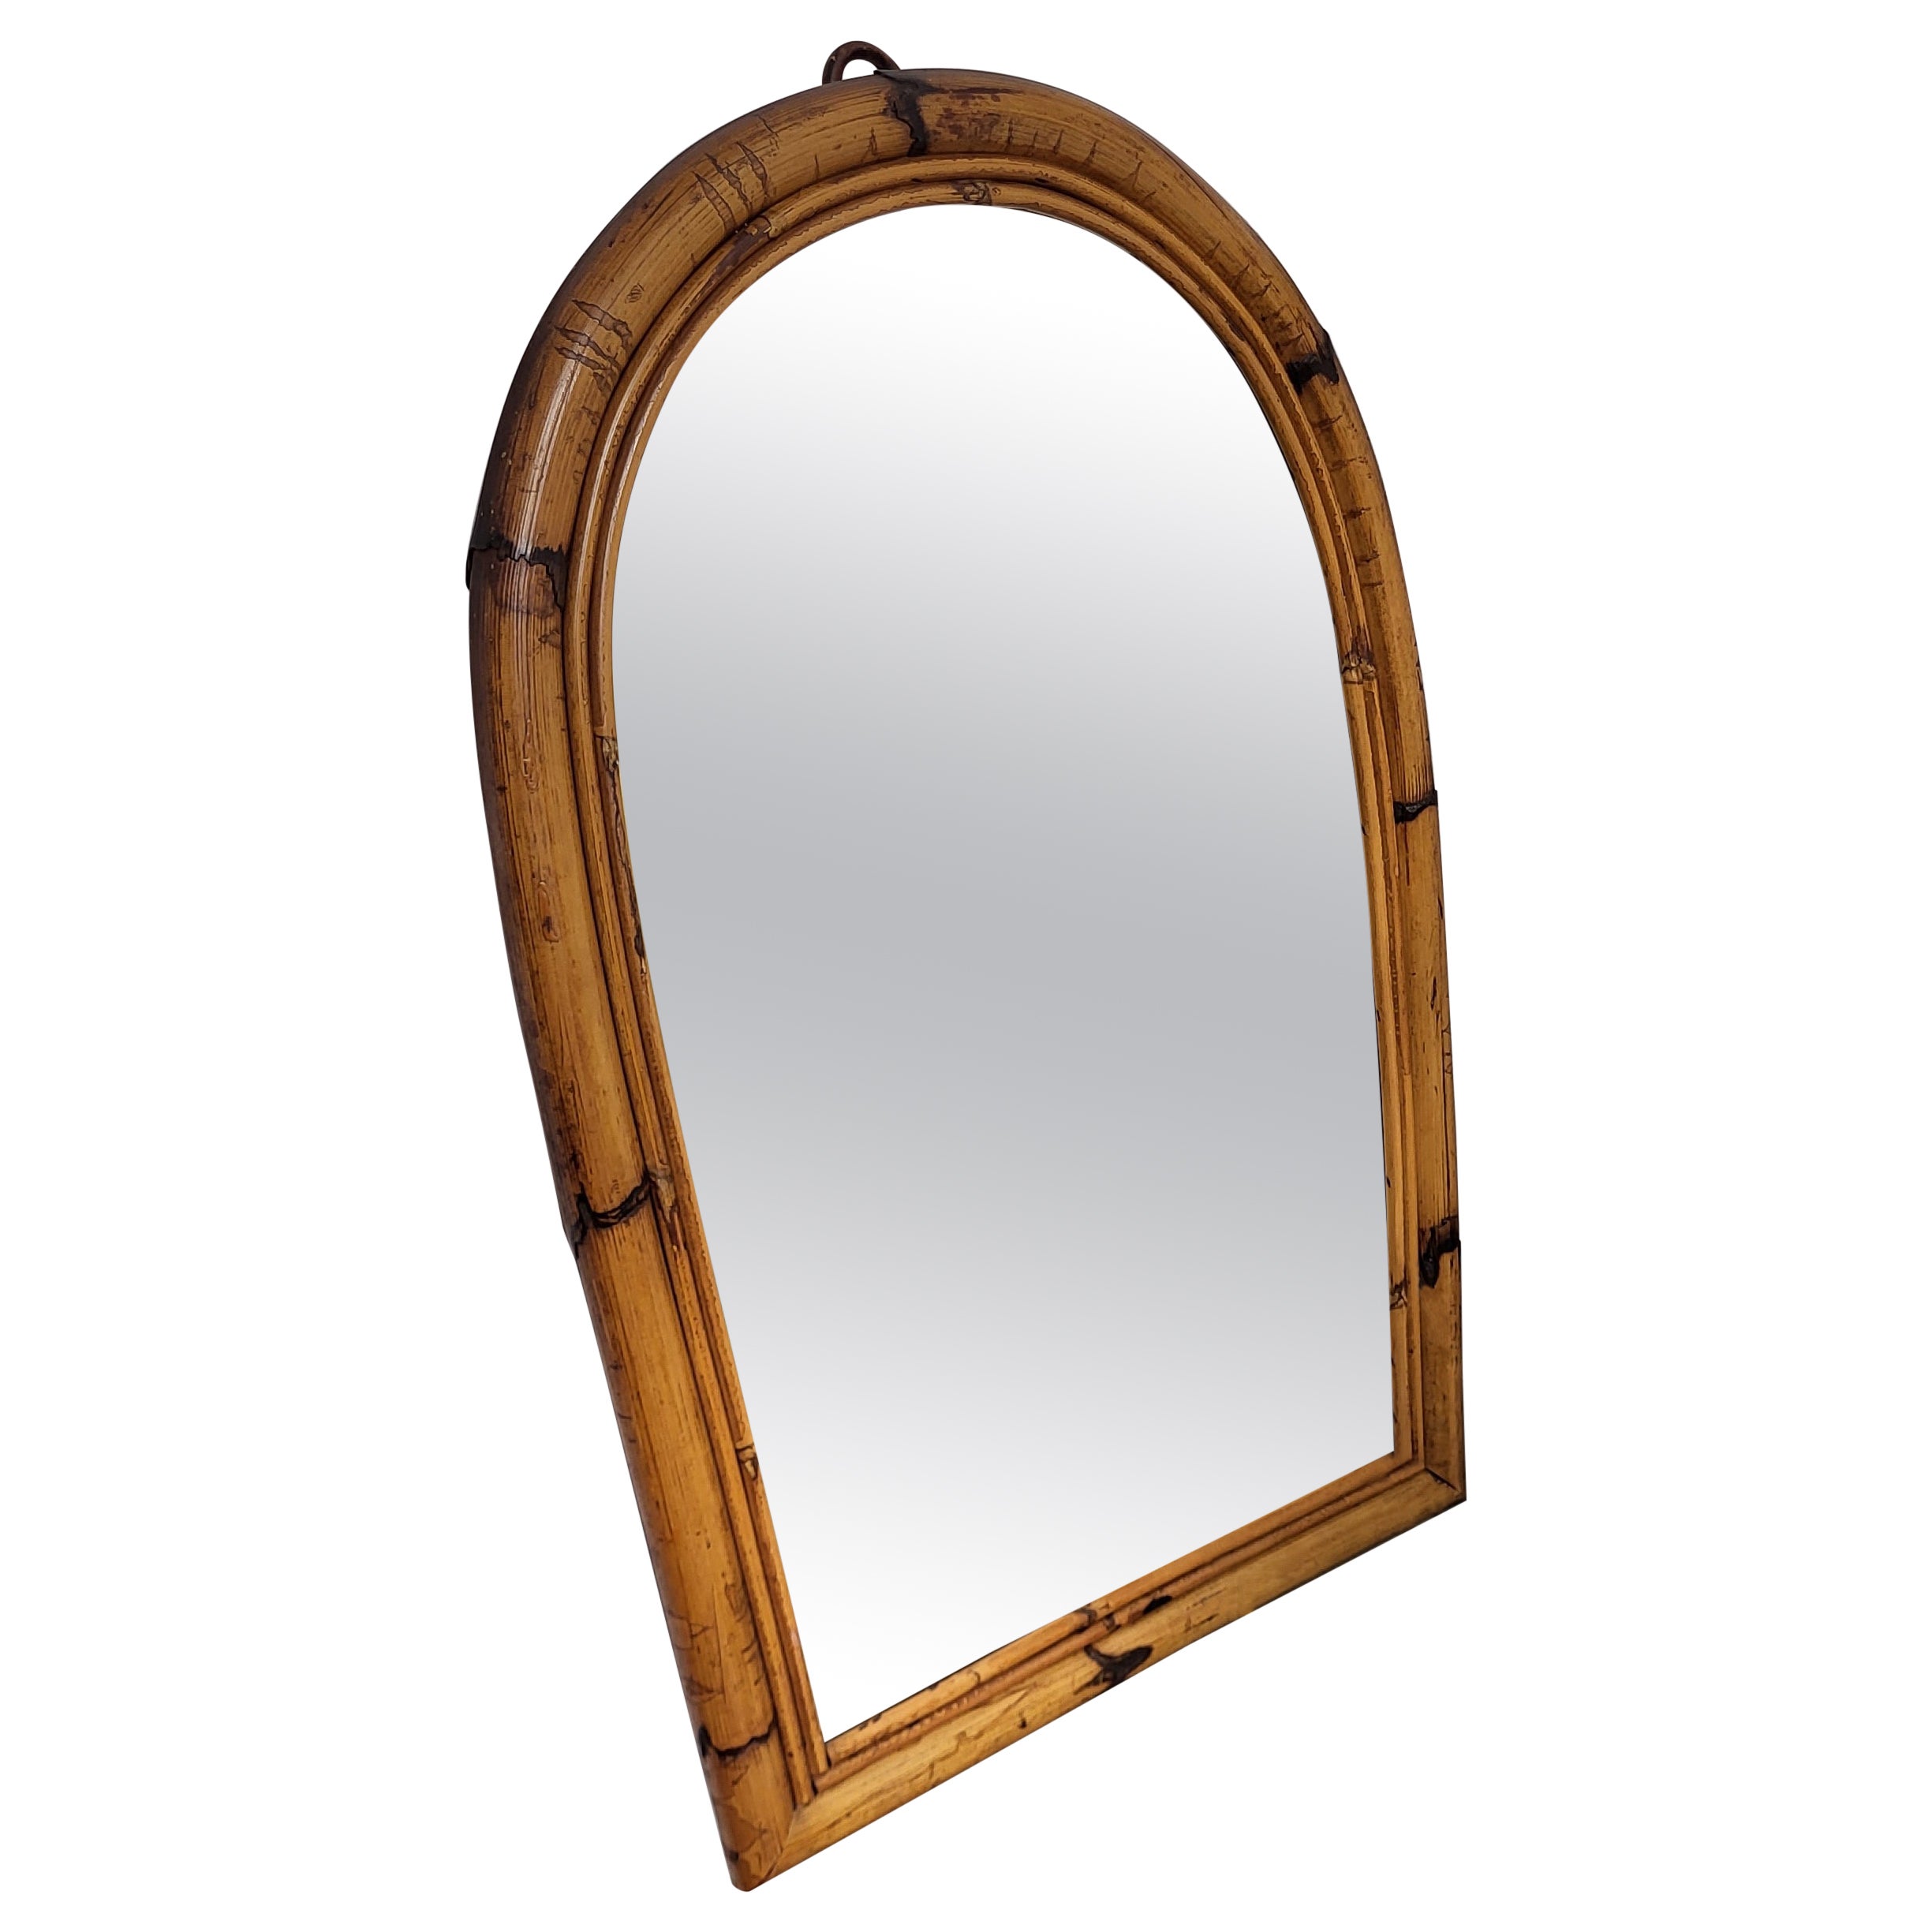 1960s Italian Bamboo Rattan Bohemian French Riviera Arched Wall Mirror For Sale